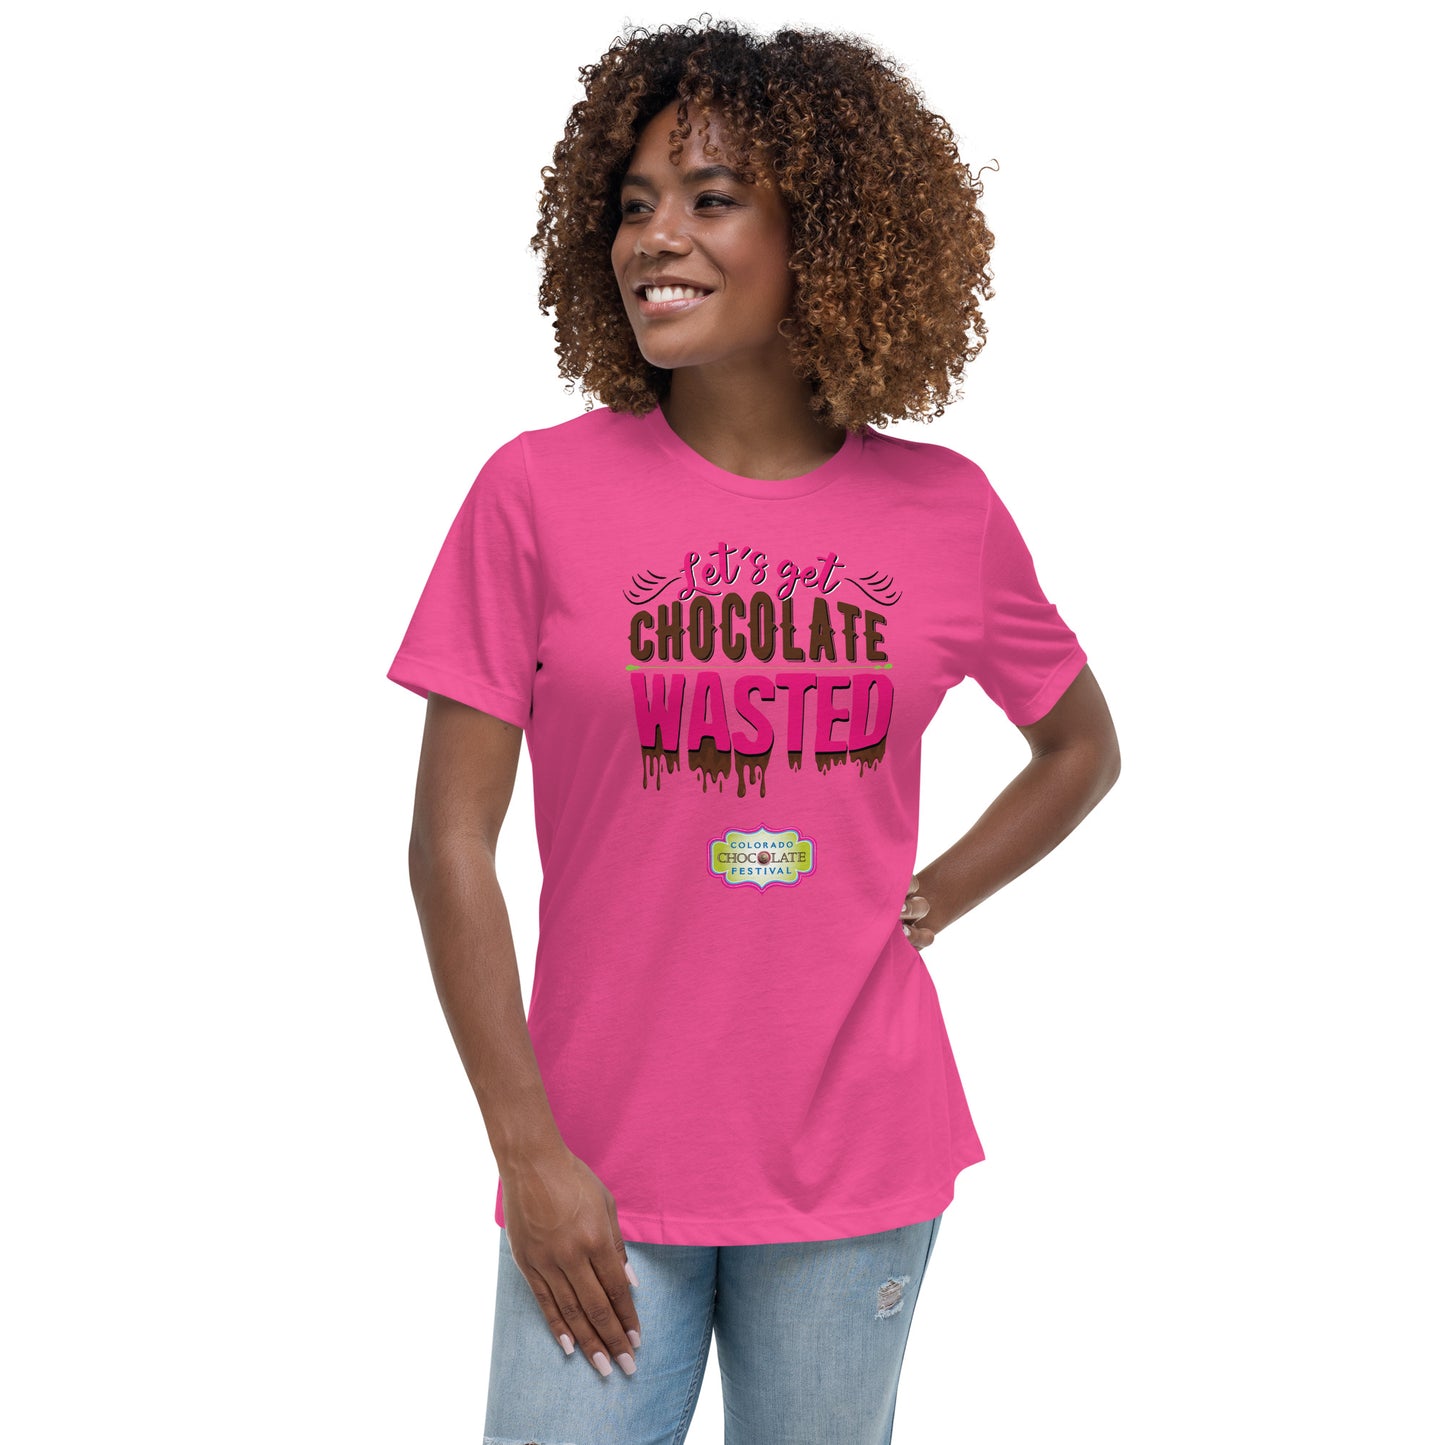 Chocolate Wasted Women's Relaxed T-Shirt